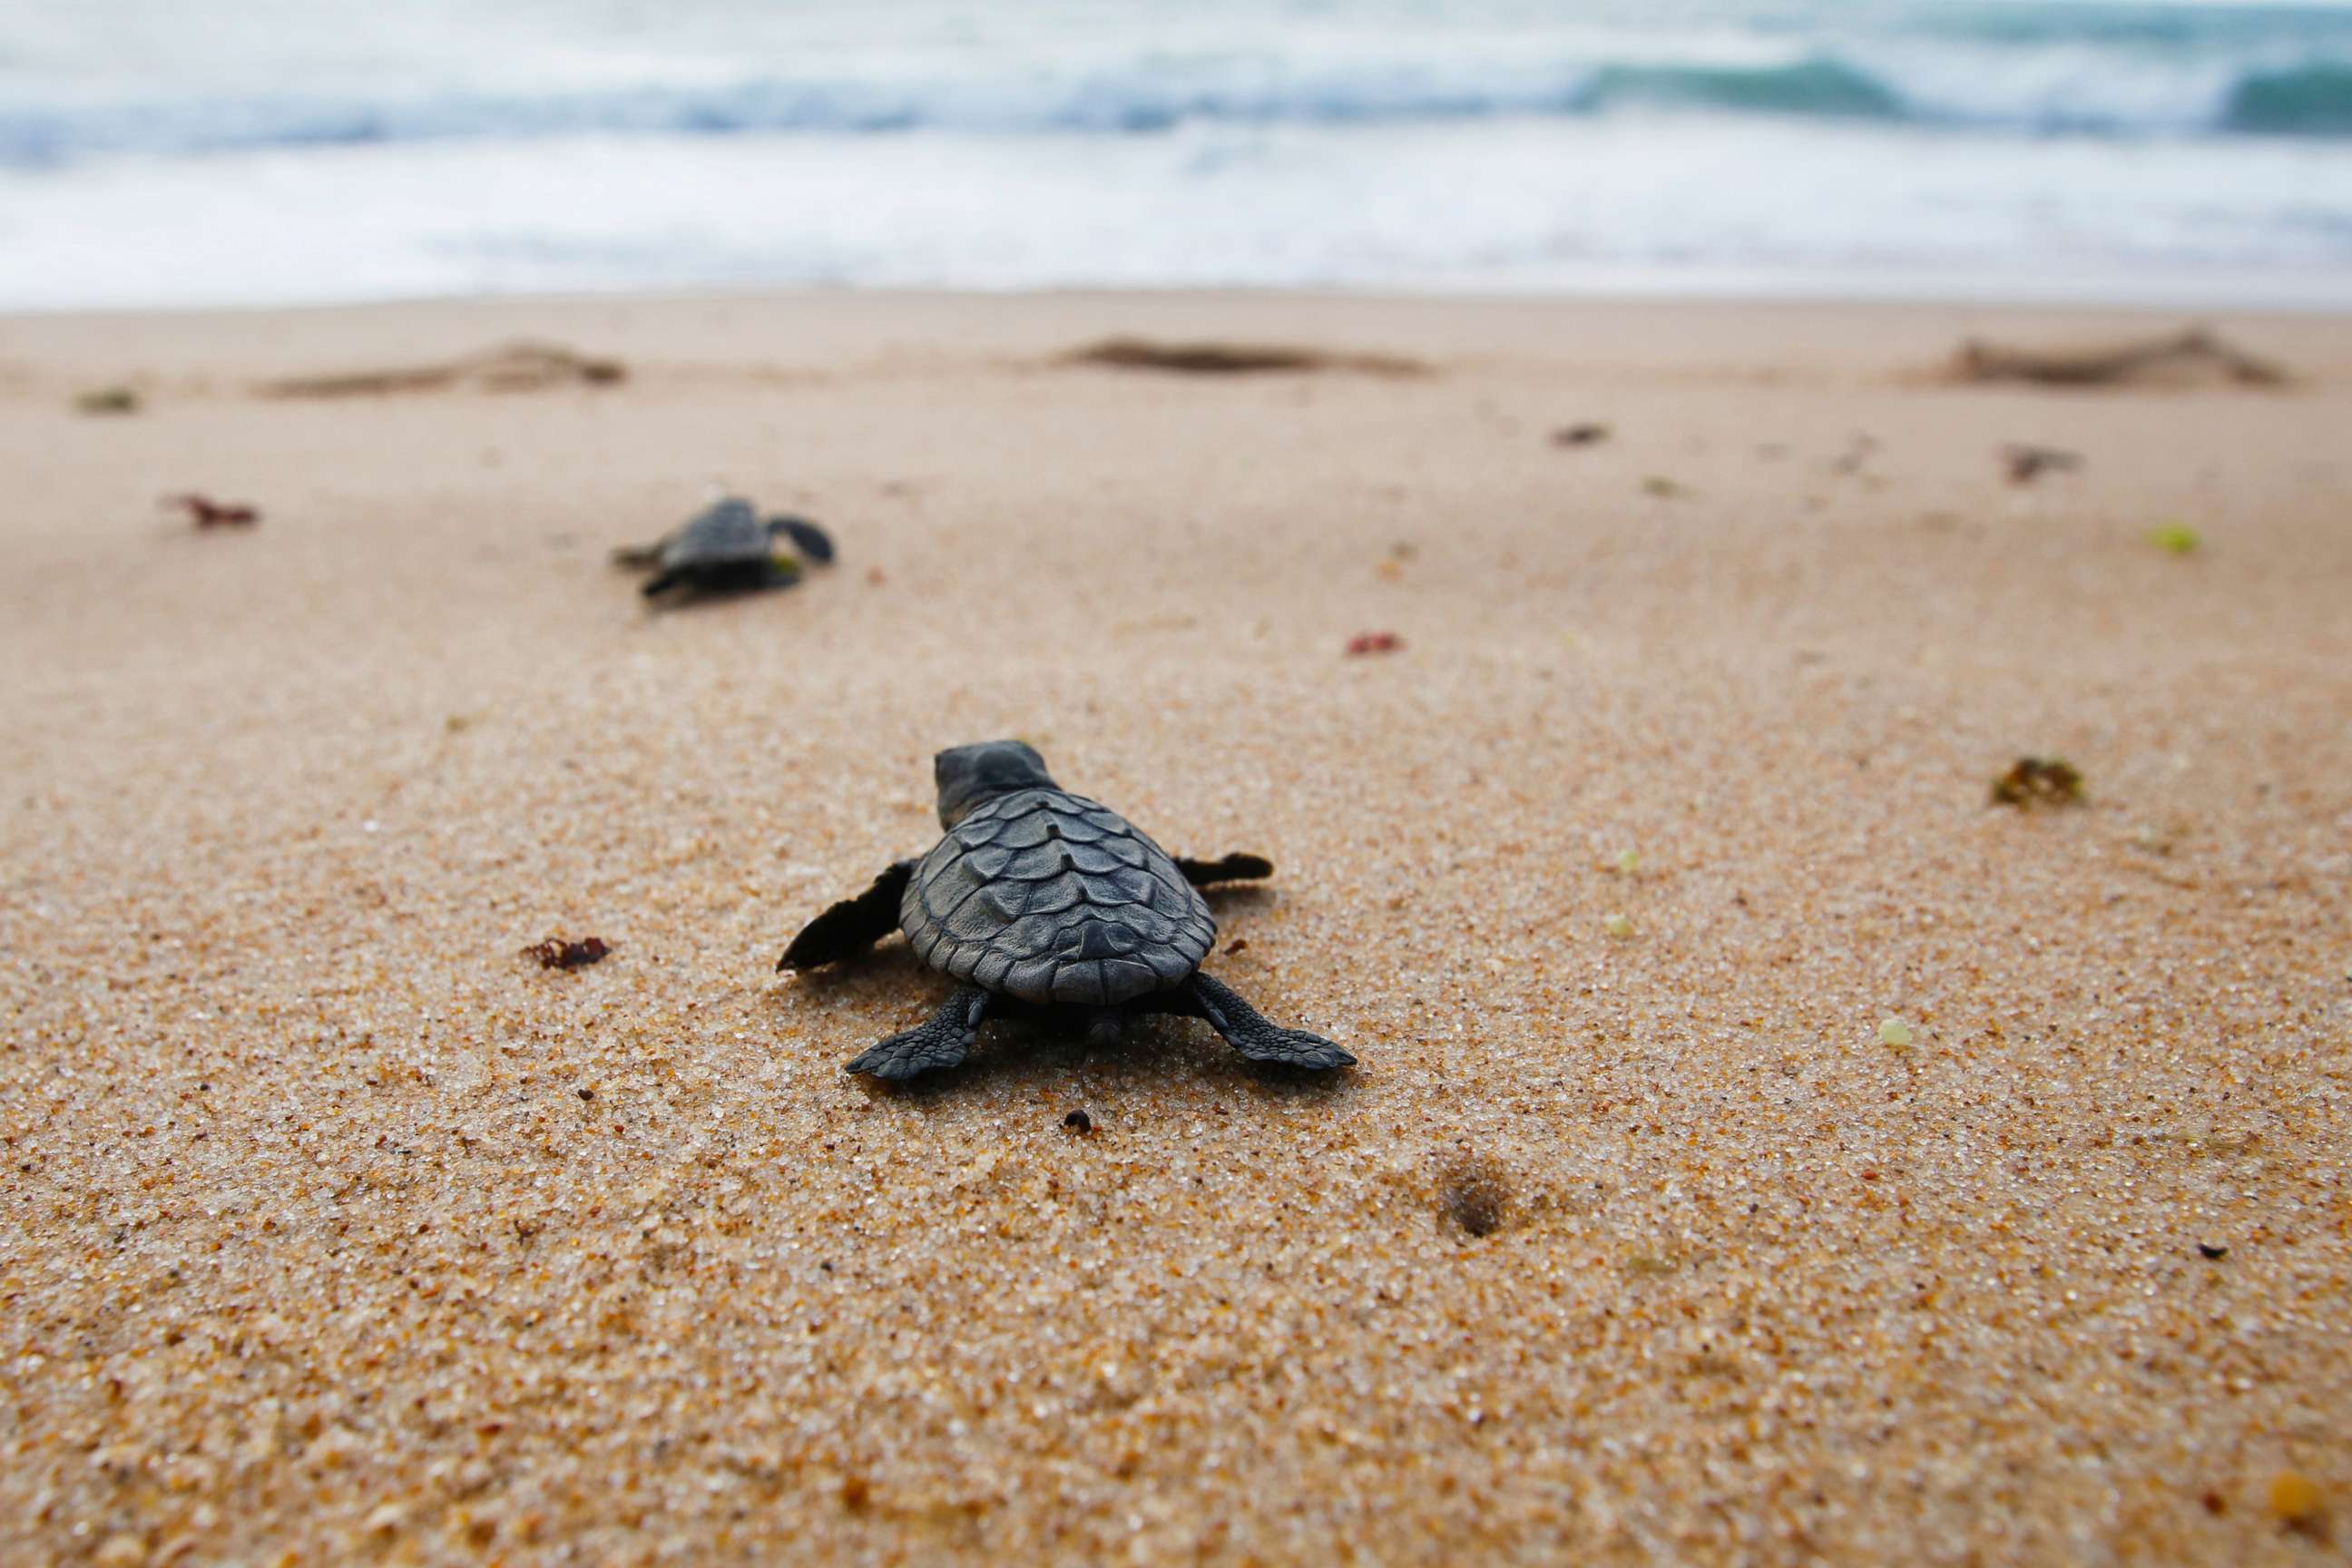 Unraveling the mystery behind a turtle's seemingly impossible journey ...